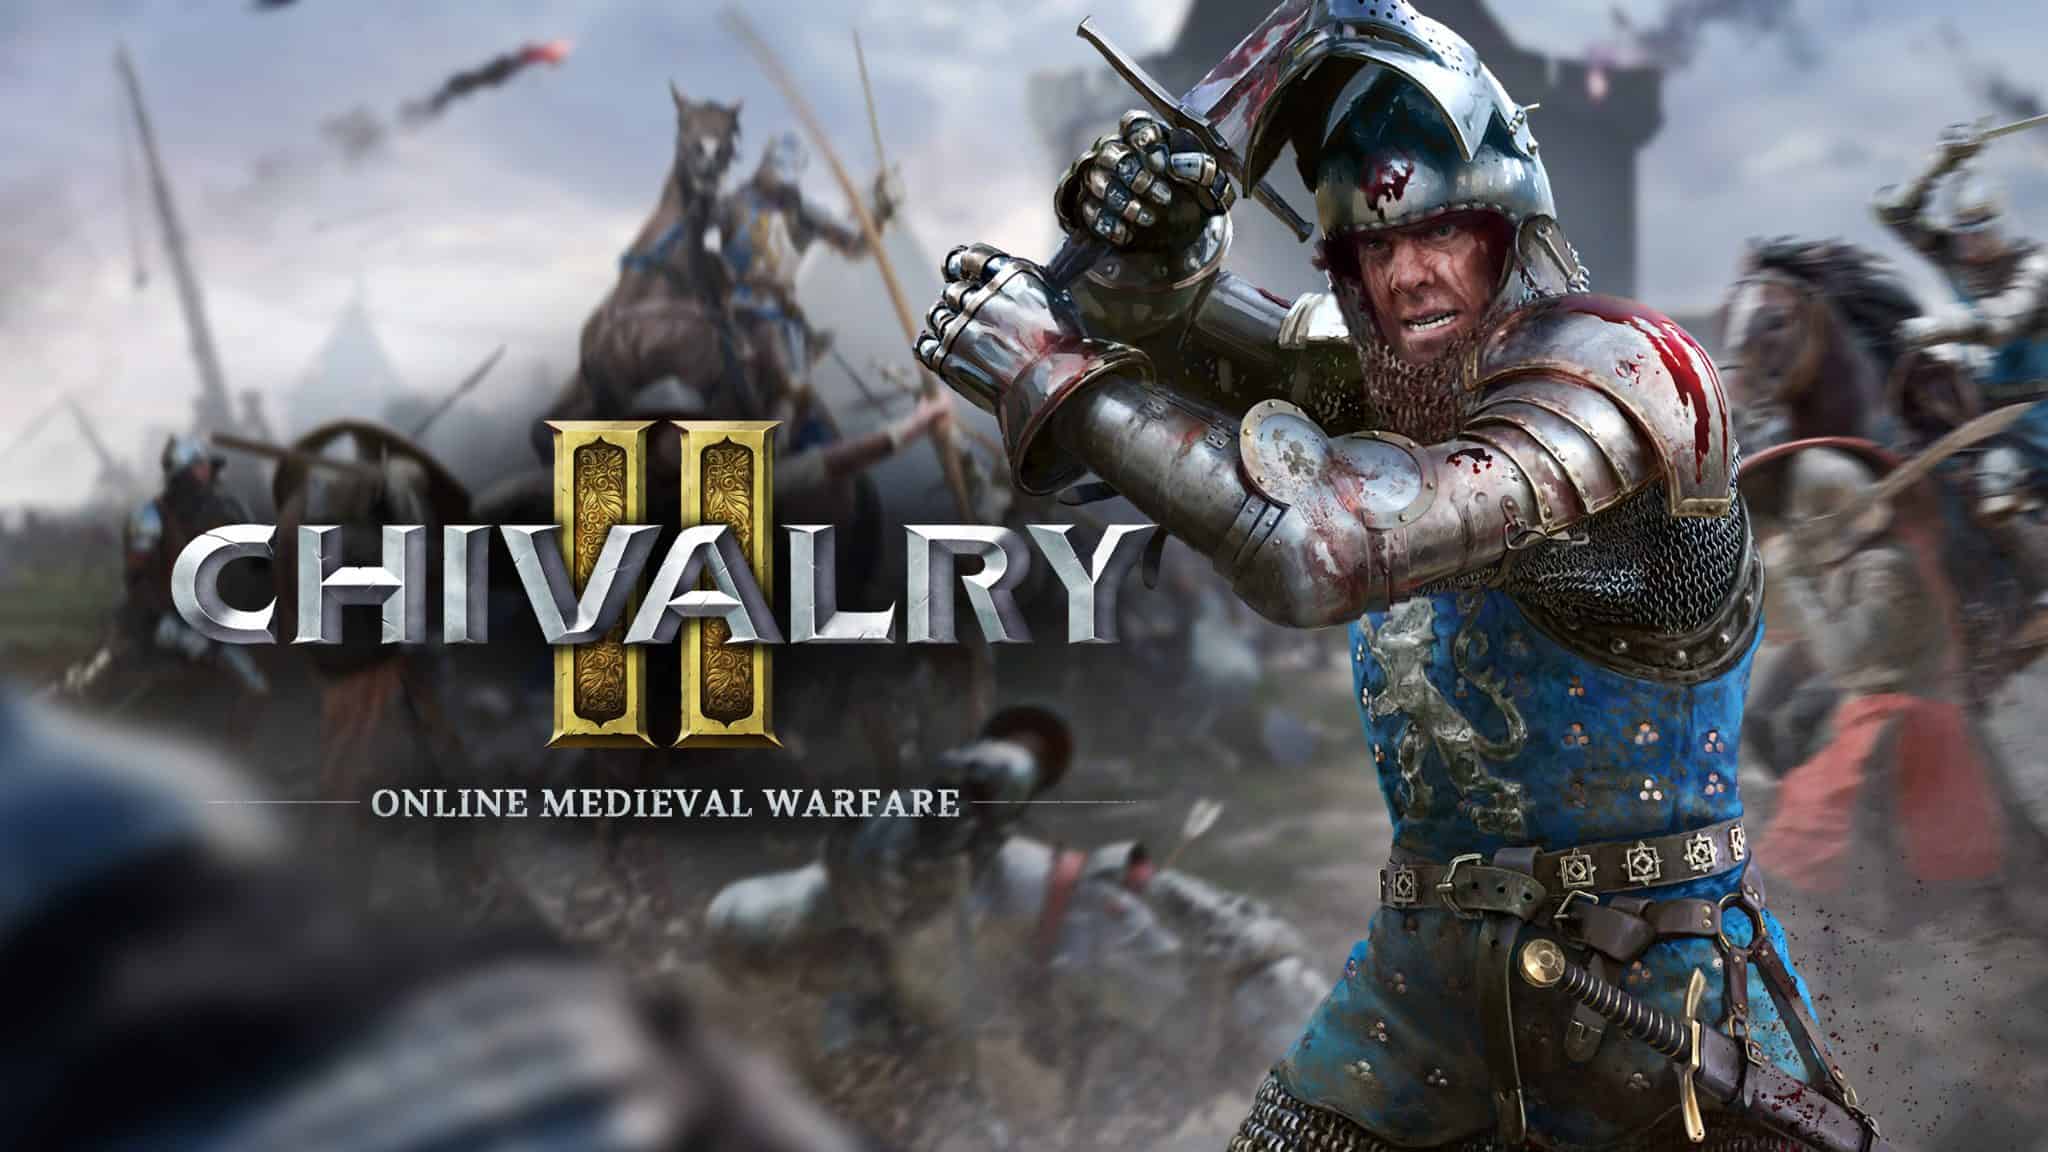 Chivalry 2 game poster